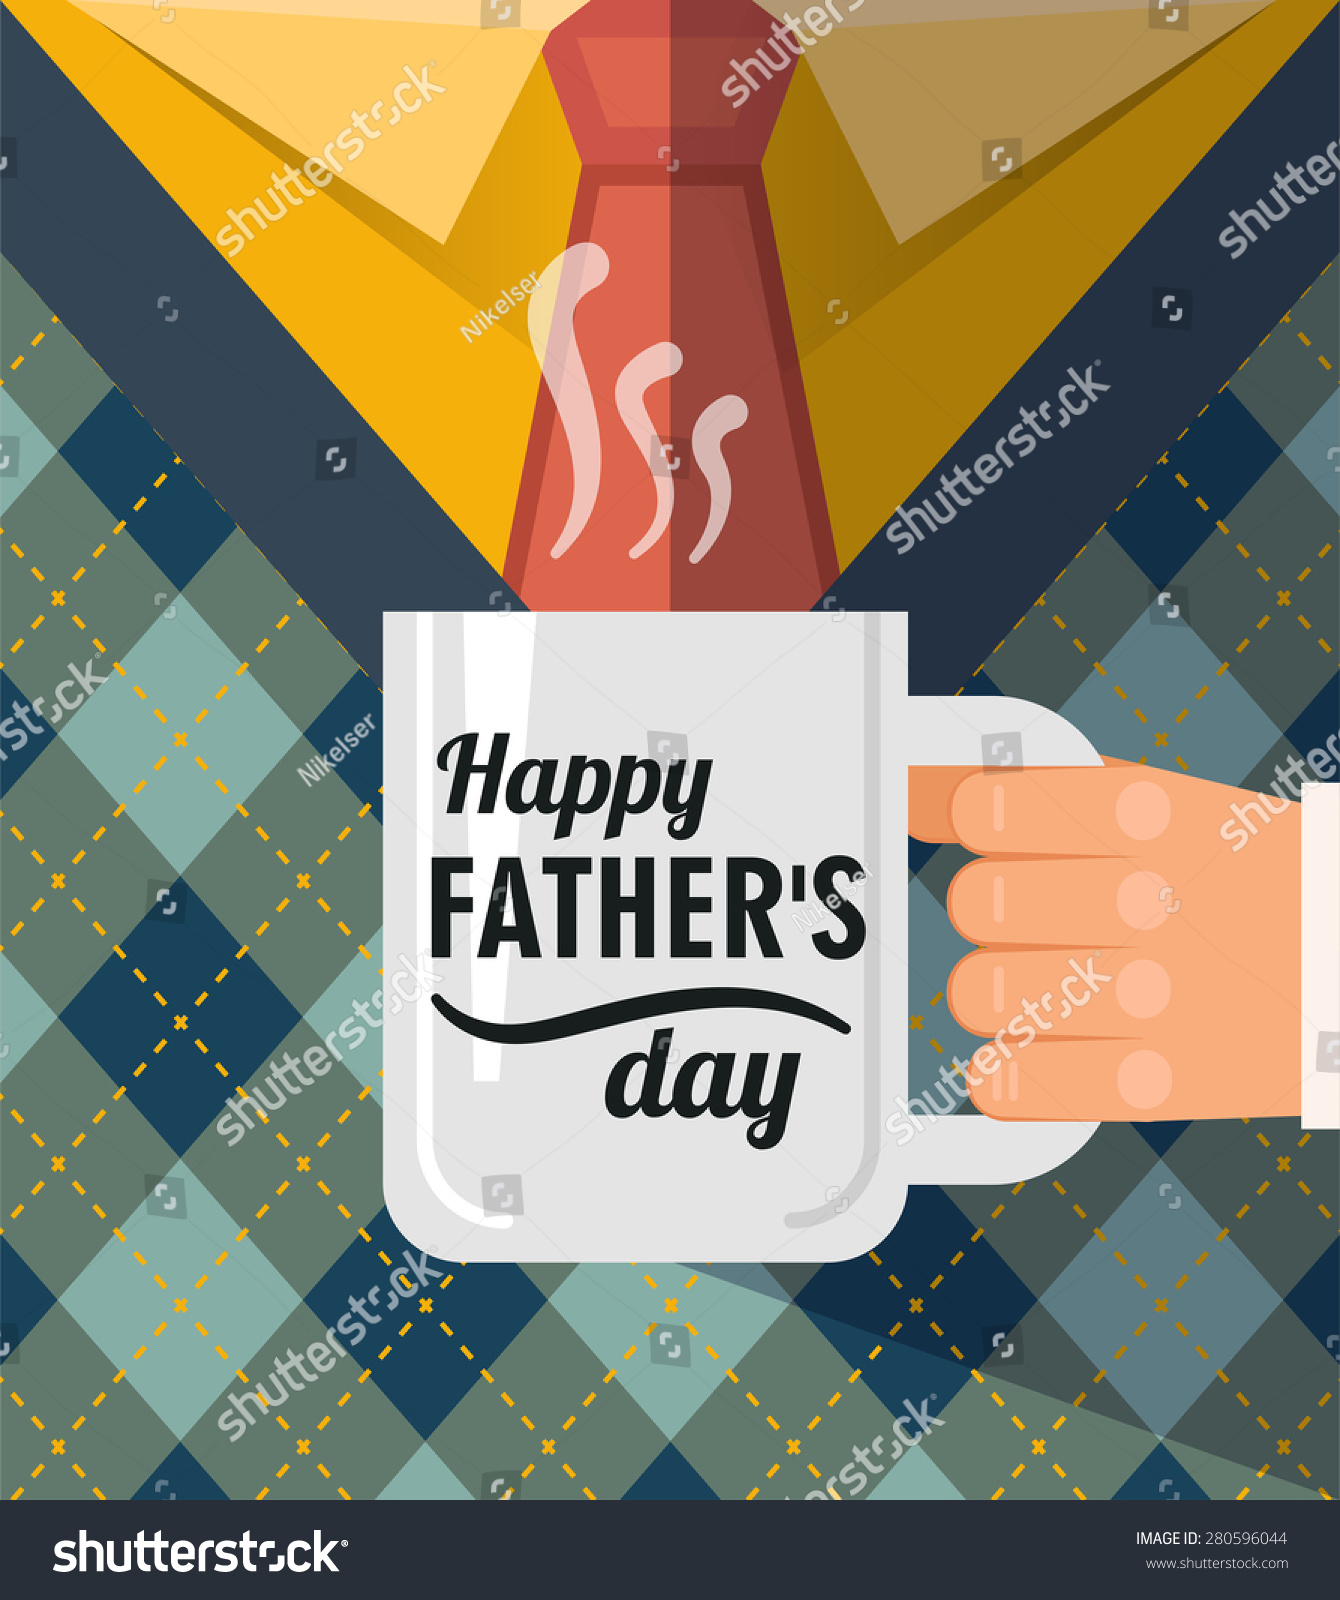 Download Happy Fathers Day Coffee Cup Congratulation Stock Vector 280596044 - Shutterstock